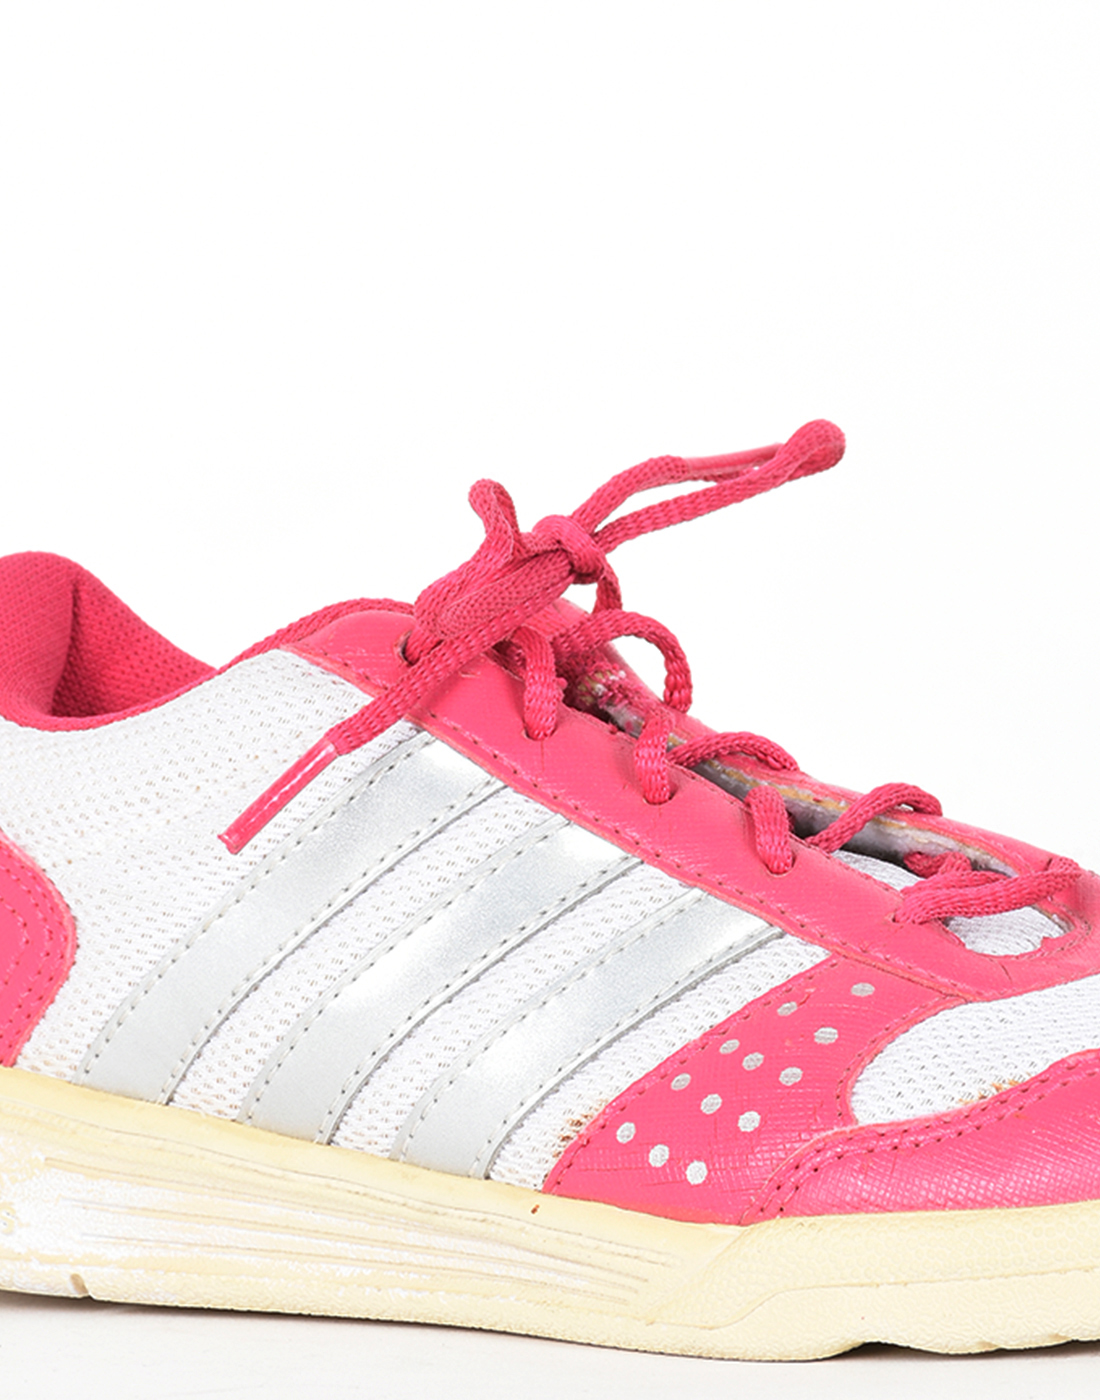 Adidas Girls Pink Sports Shoes